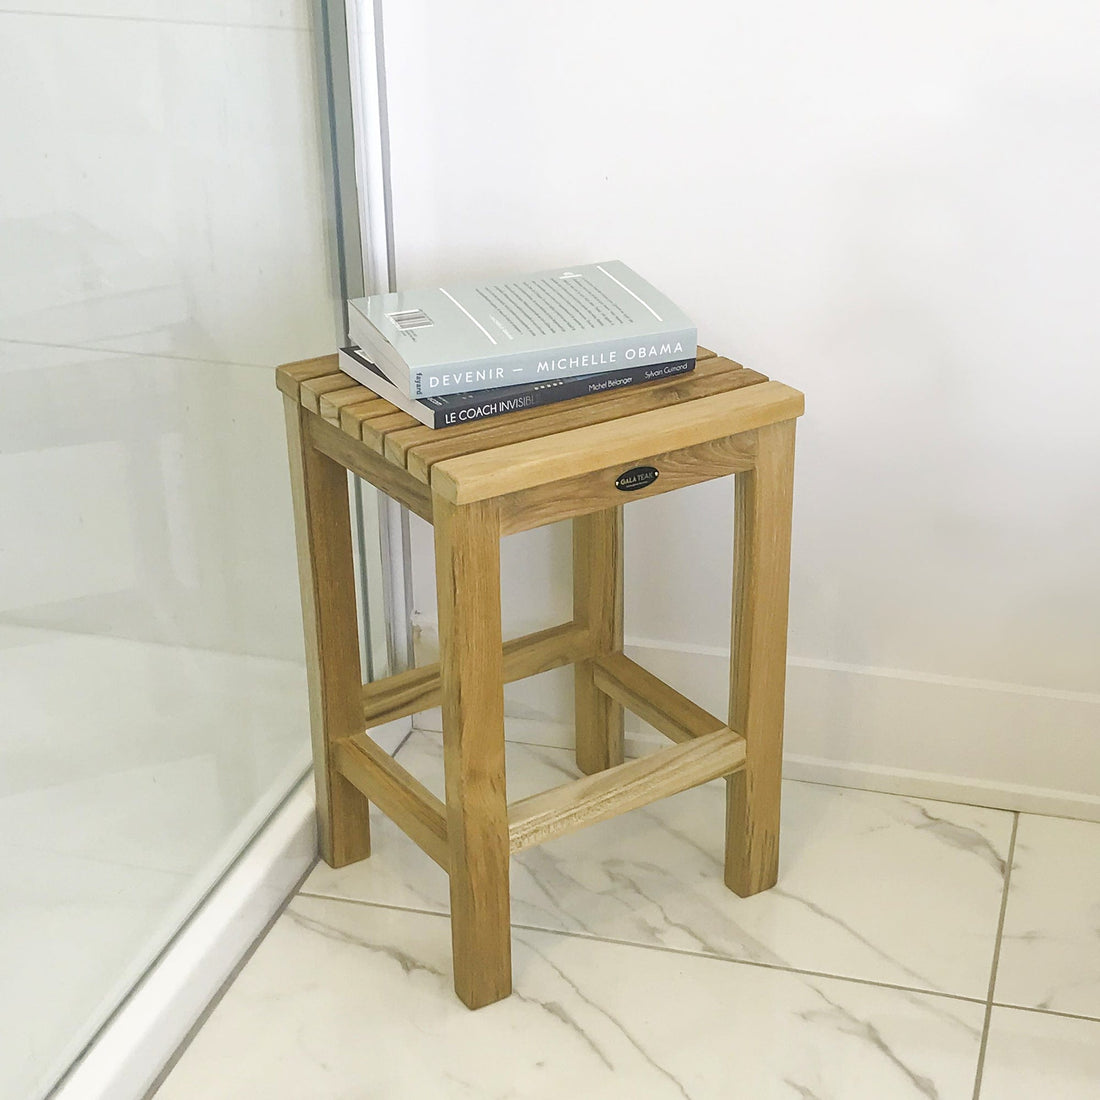 Lifestyle 2 Shower Bench / Sun 12" - The Shower Head Store